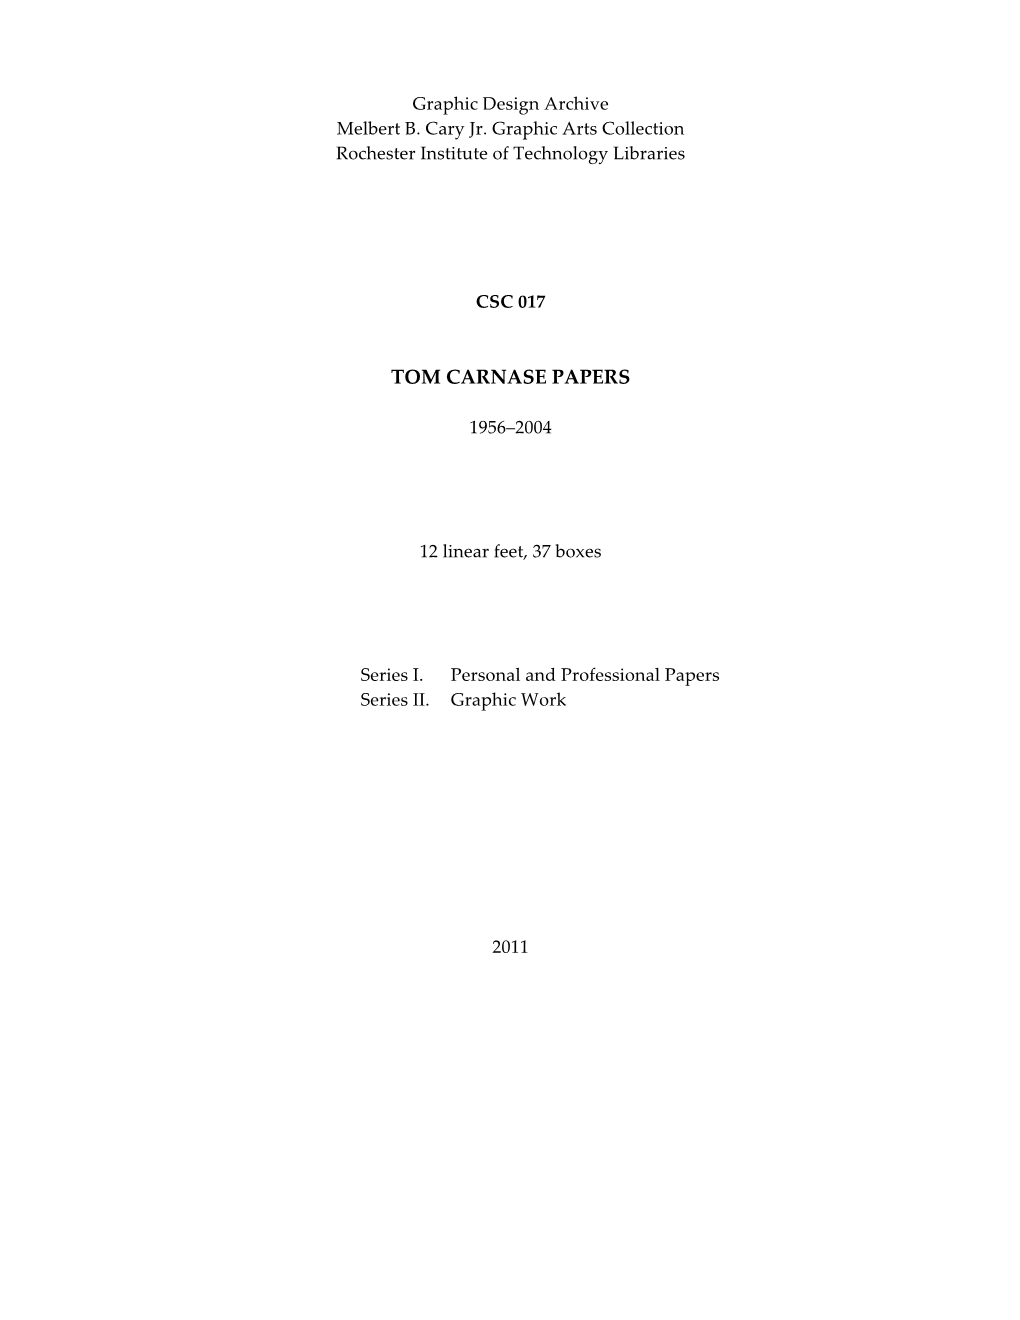 Tom Carnase Papers